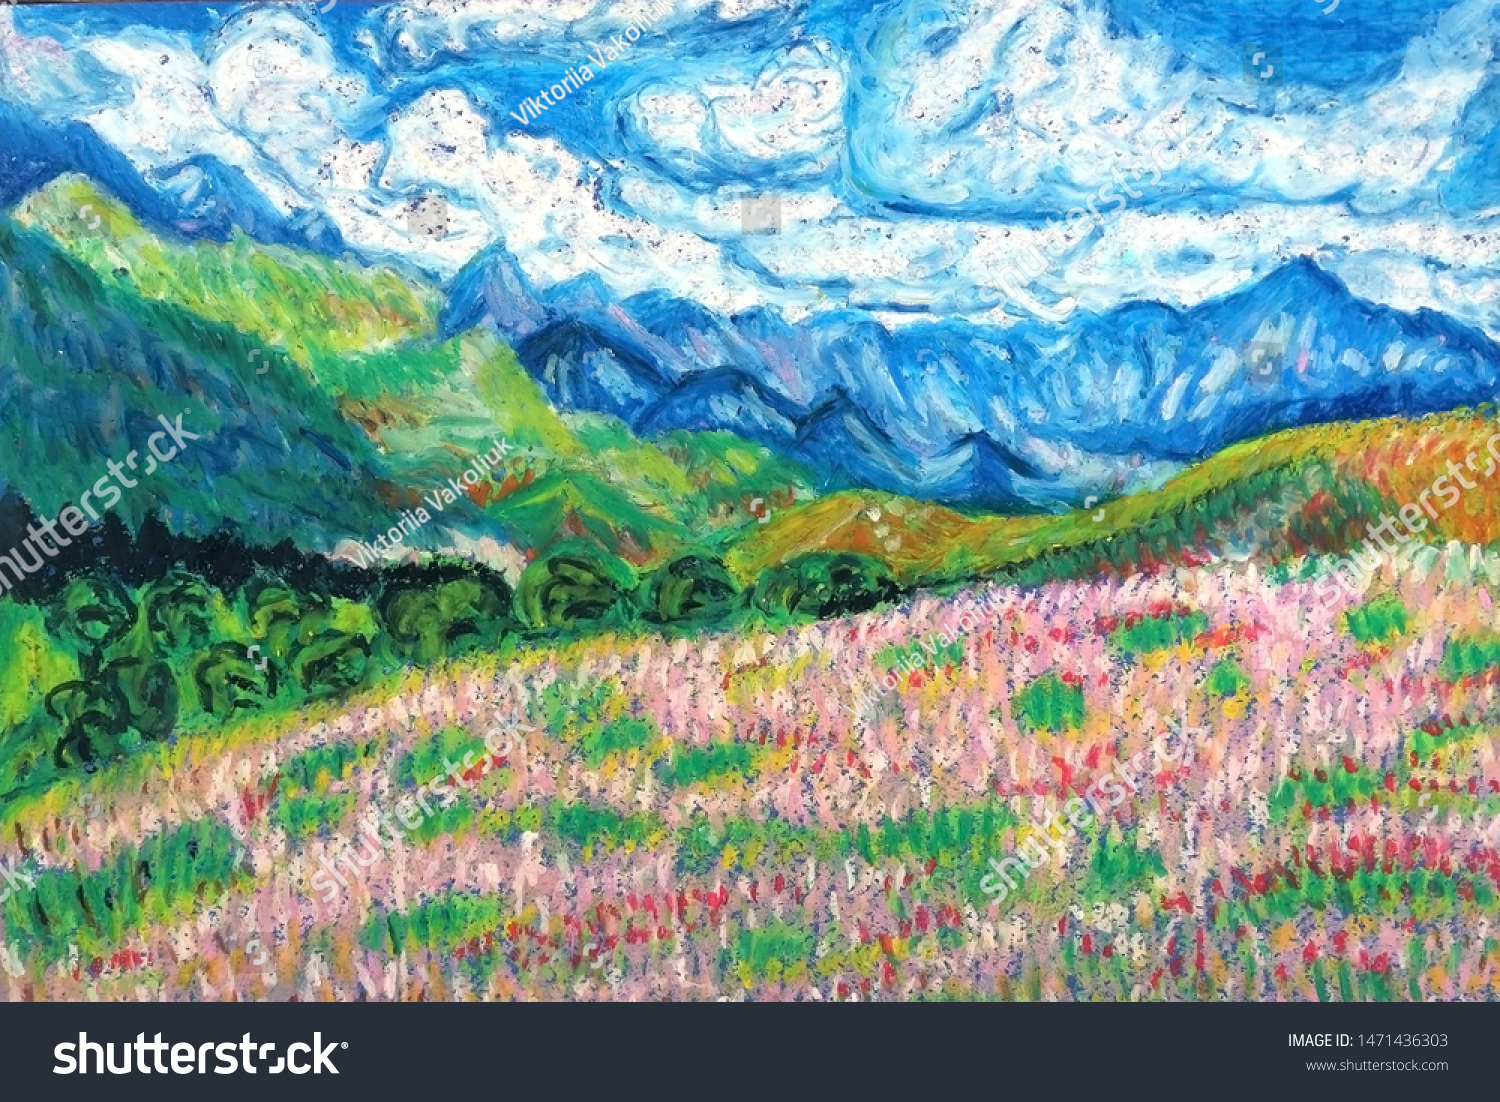 Summer Landscape Drawing Blue Mountains Green Stock Illustration 1471436303 Mountain landscape, drawing mountains on the horizon, pastel piture. https www shutterstock com image illustration summer landscape drawing blue mountains green 1471436303